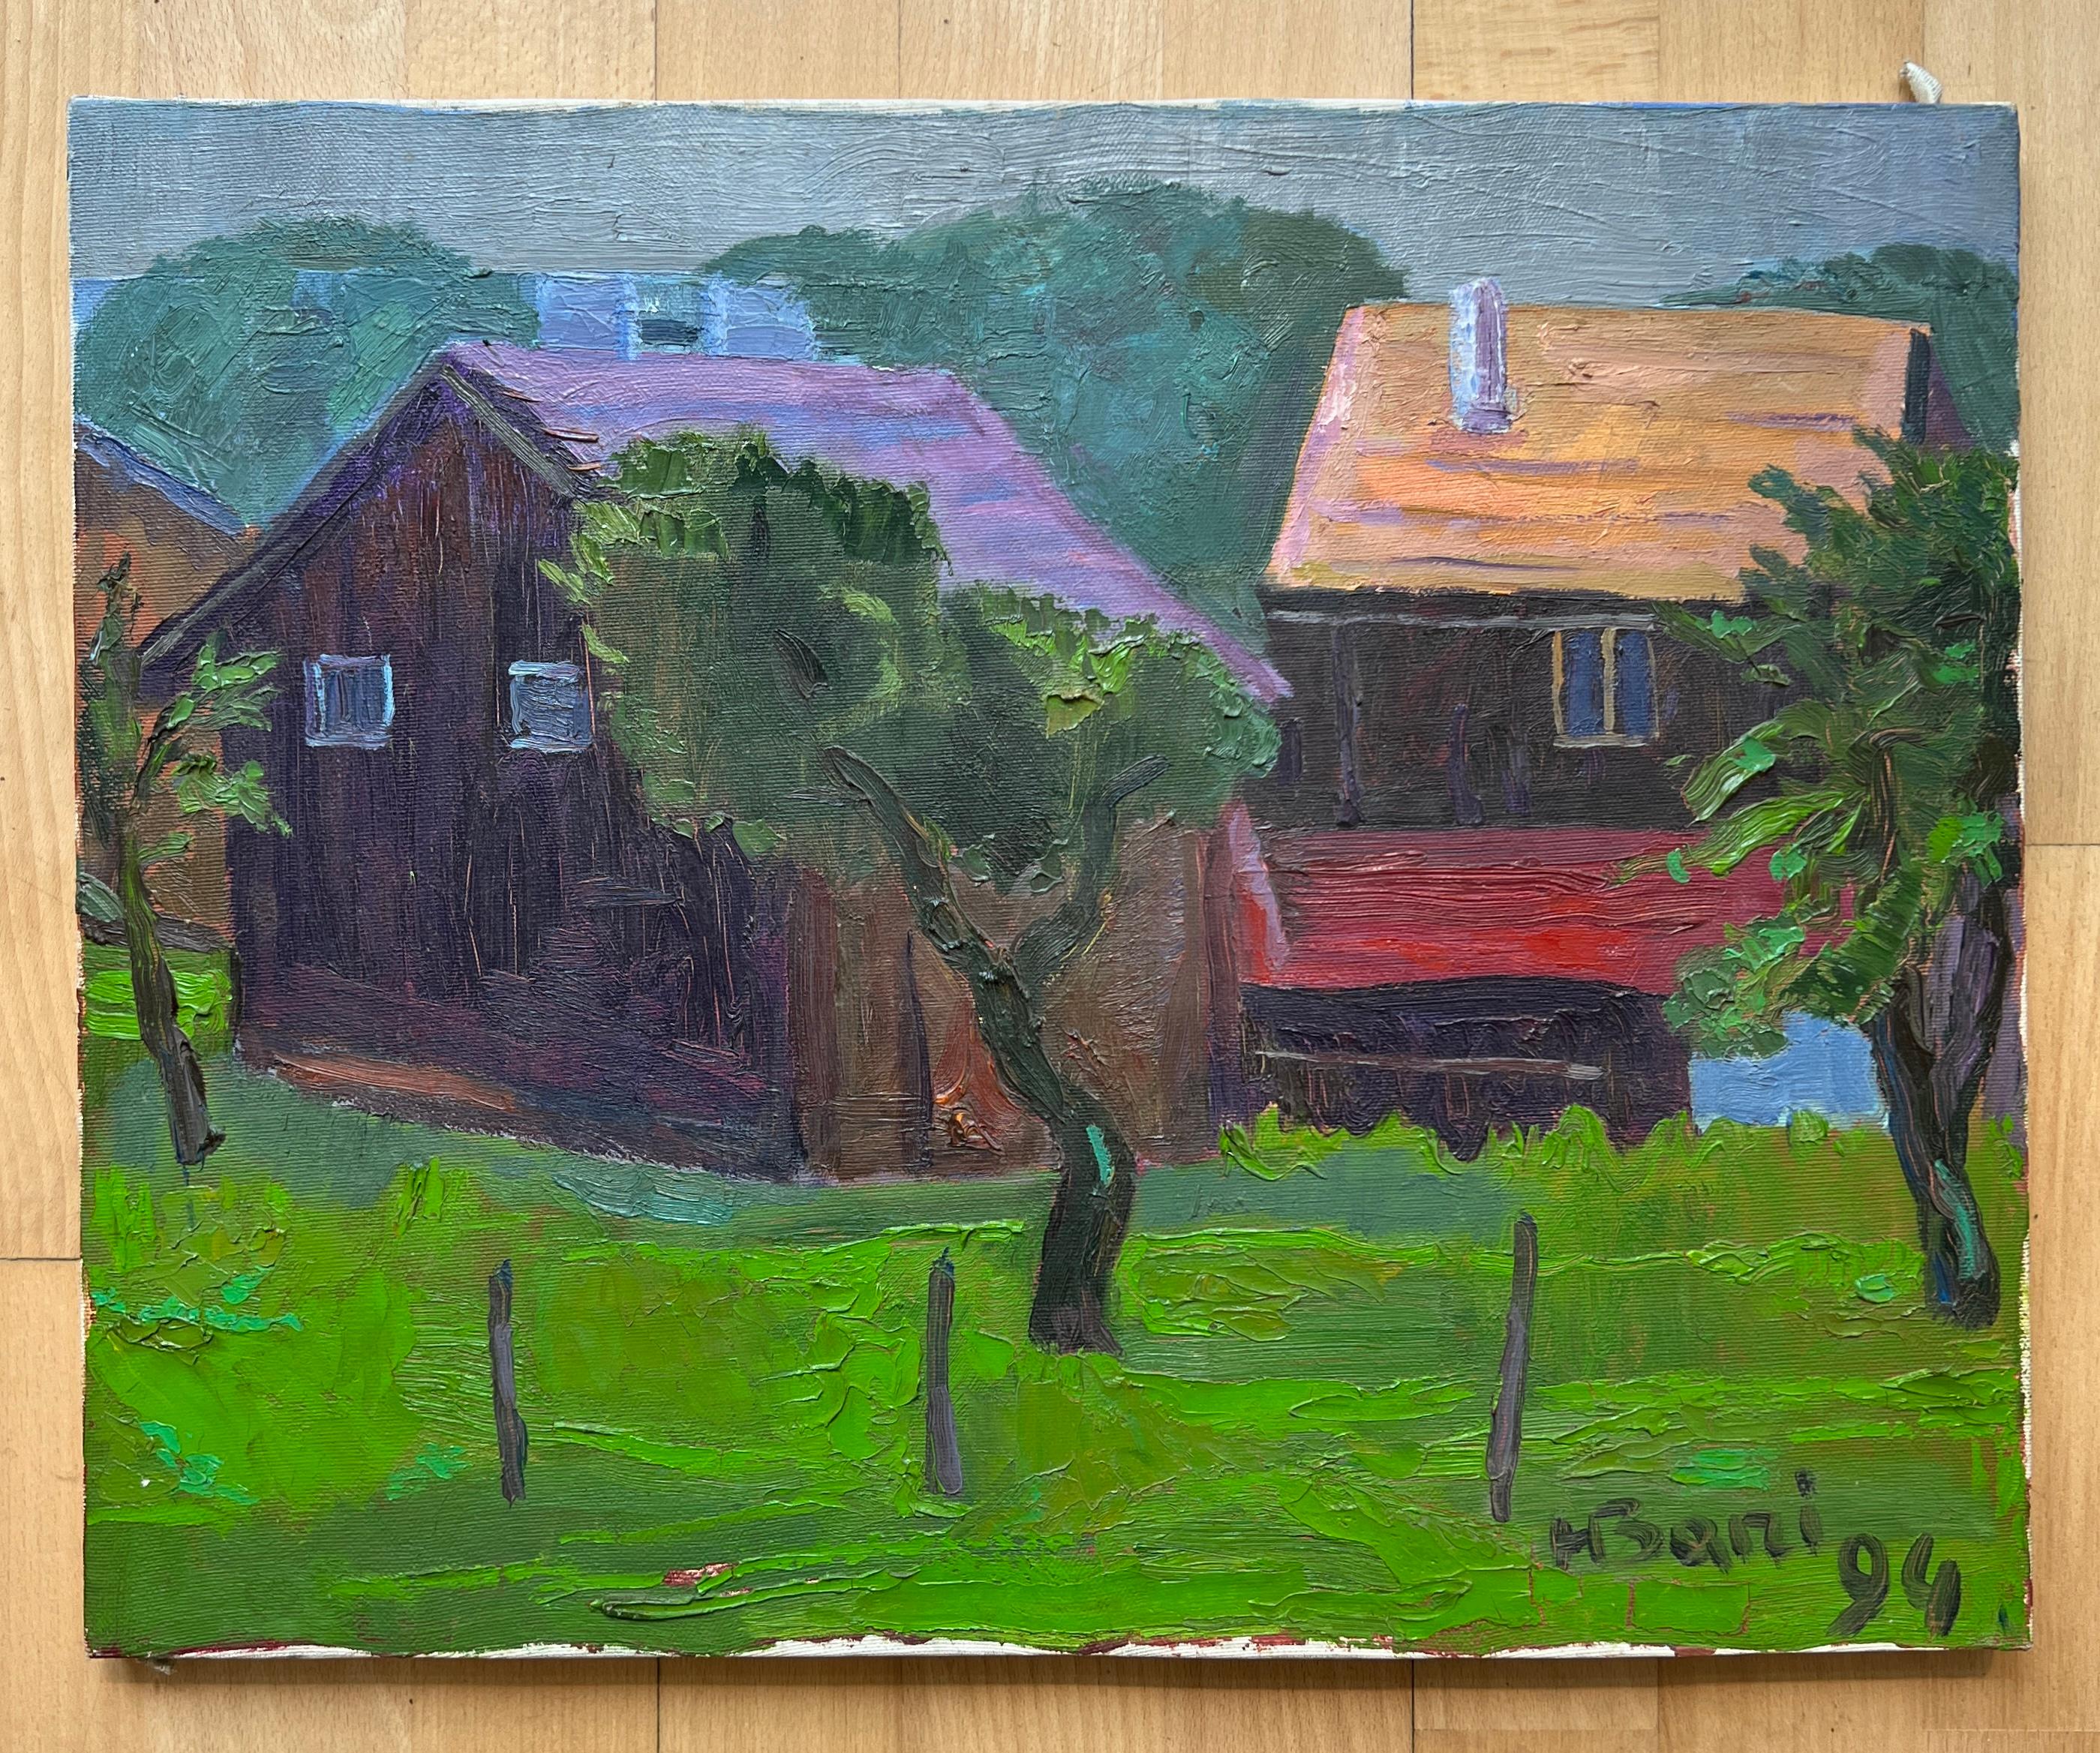 Cottages and pastures - Painting by H. Bani